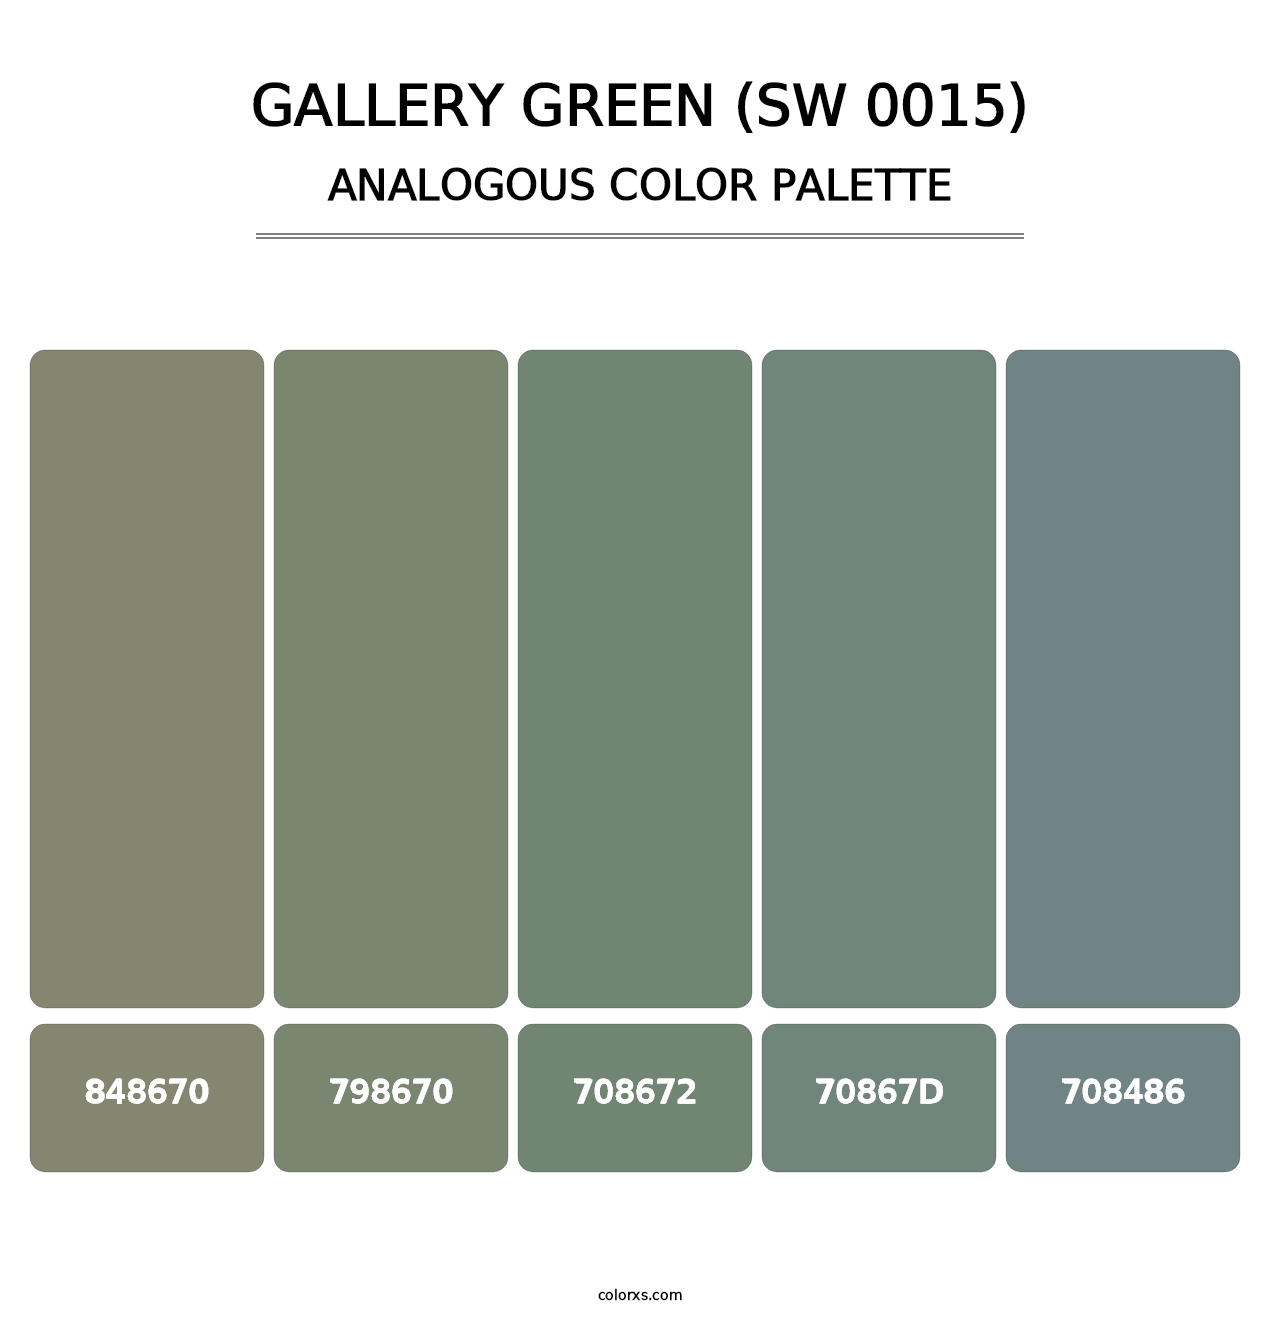 Gallery Green (SW 0015) - Analogous Color Palette